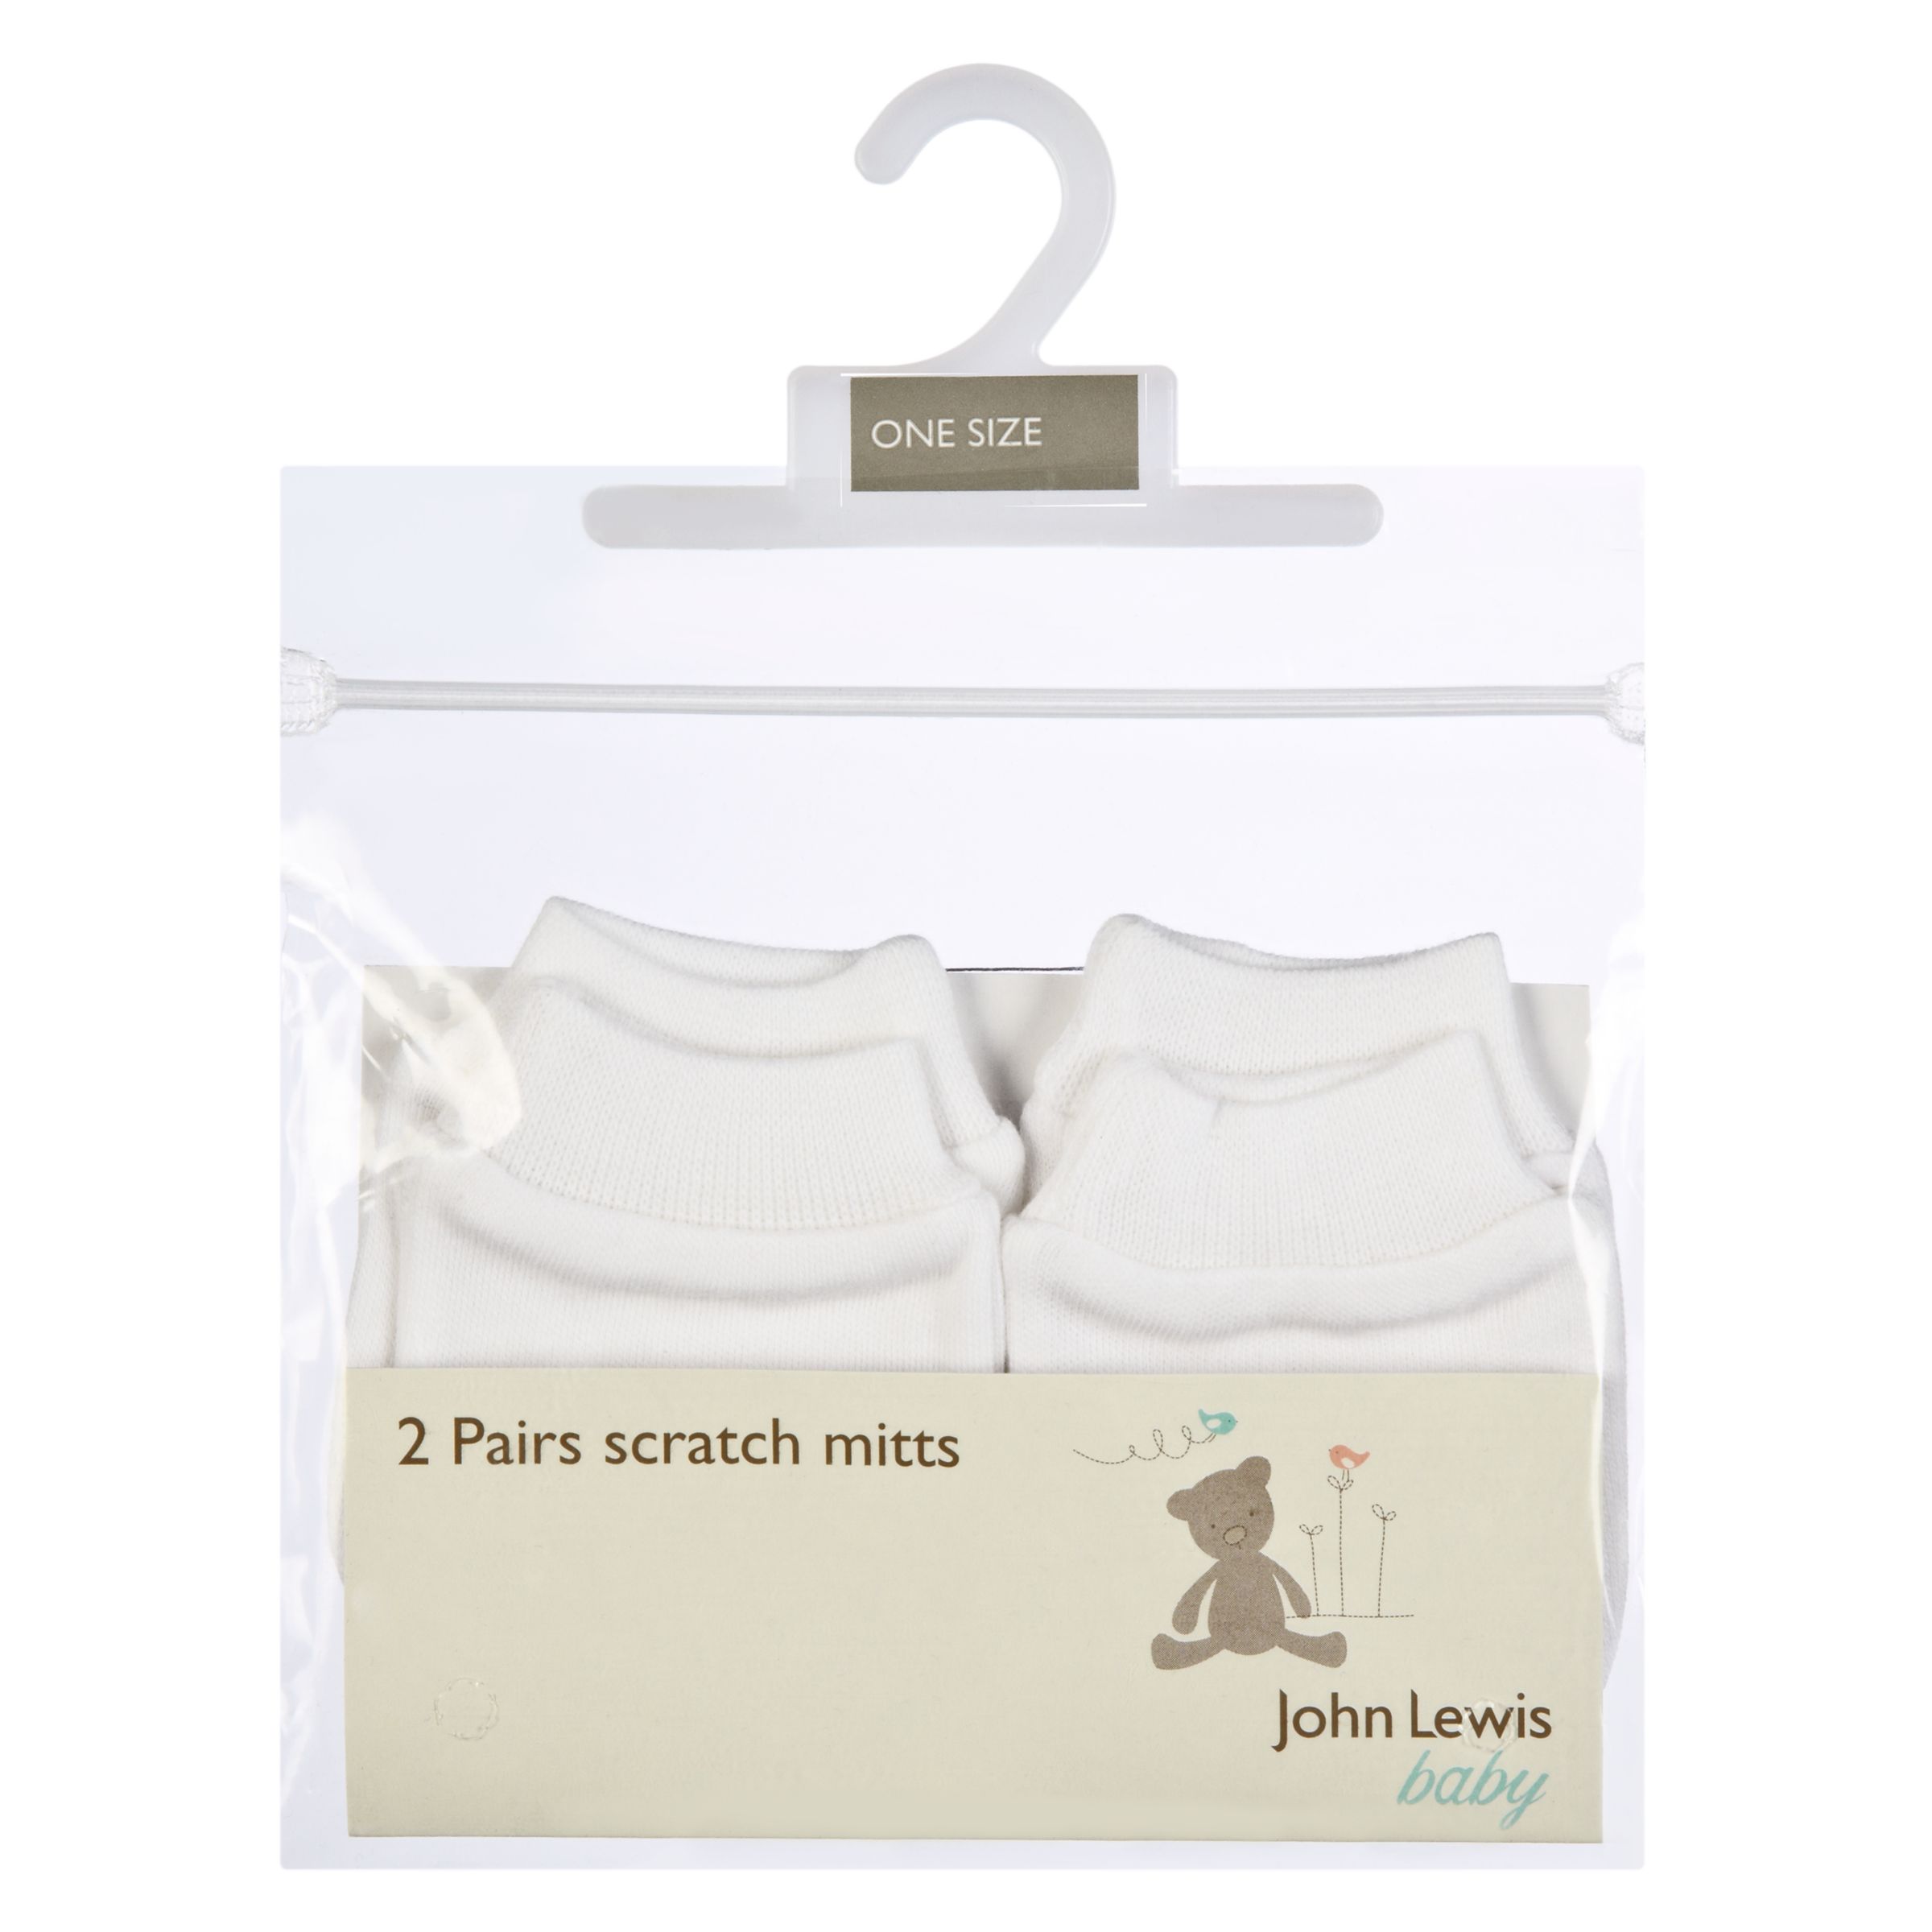 John Lewis Scratch Mitts, White, One Size